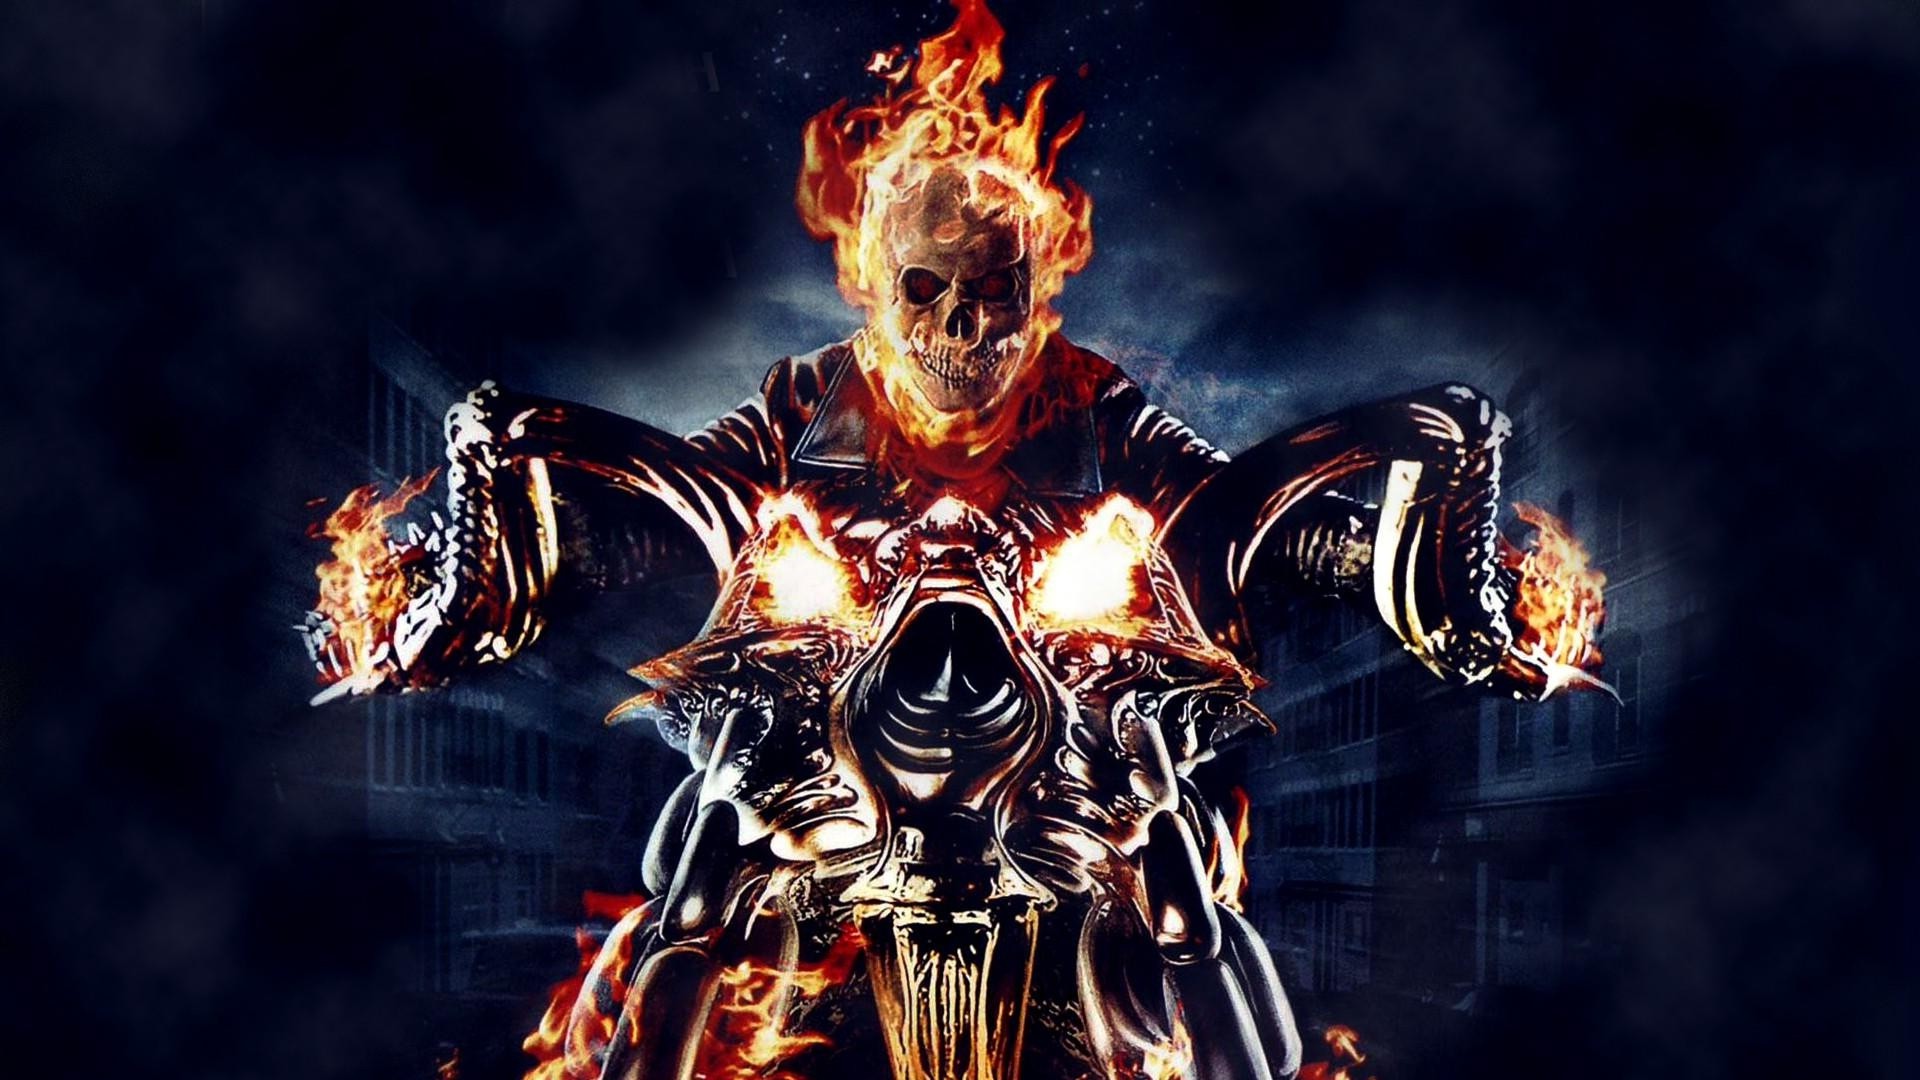 Ghost Rider, Skull, Fire, Motorcycle, Comics, Graphic Novels Wallpapers